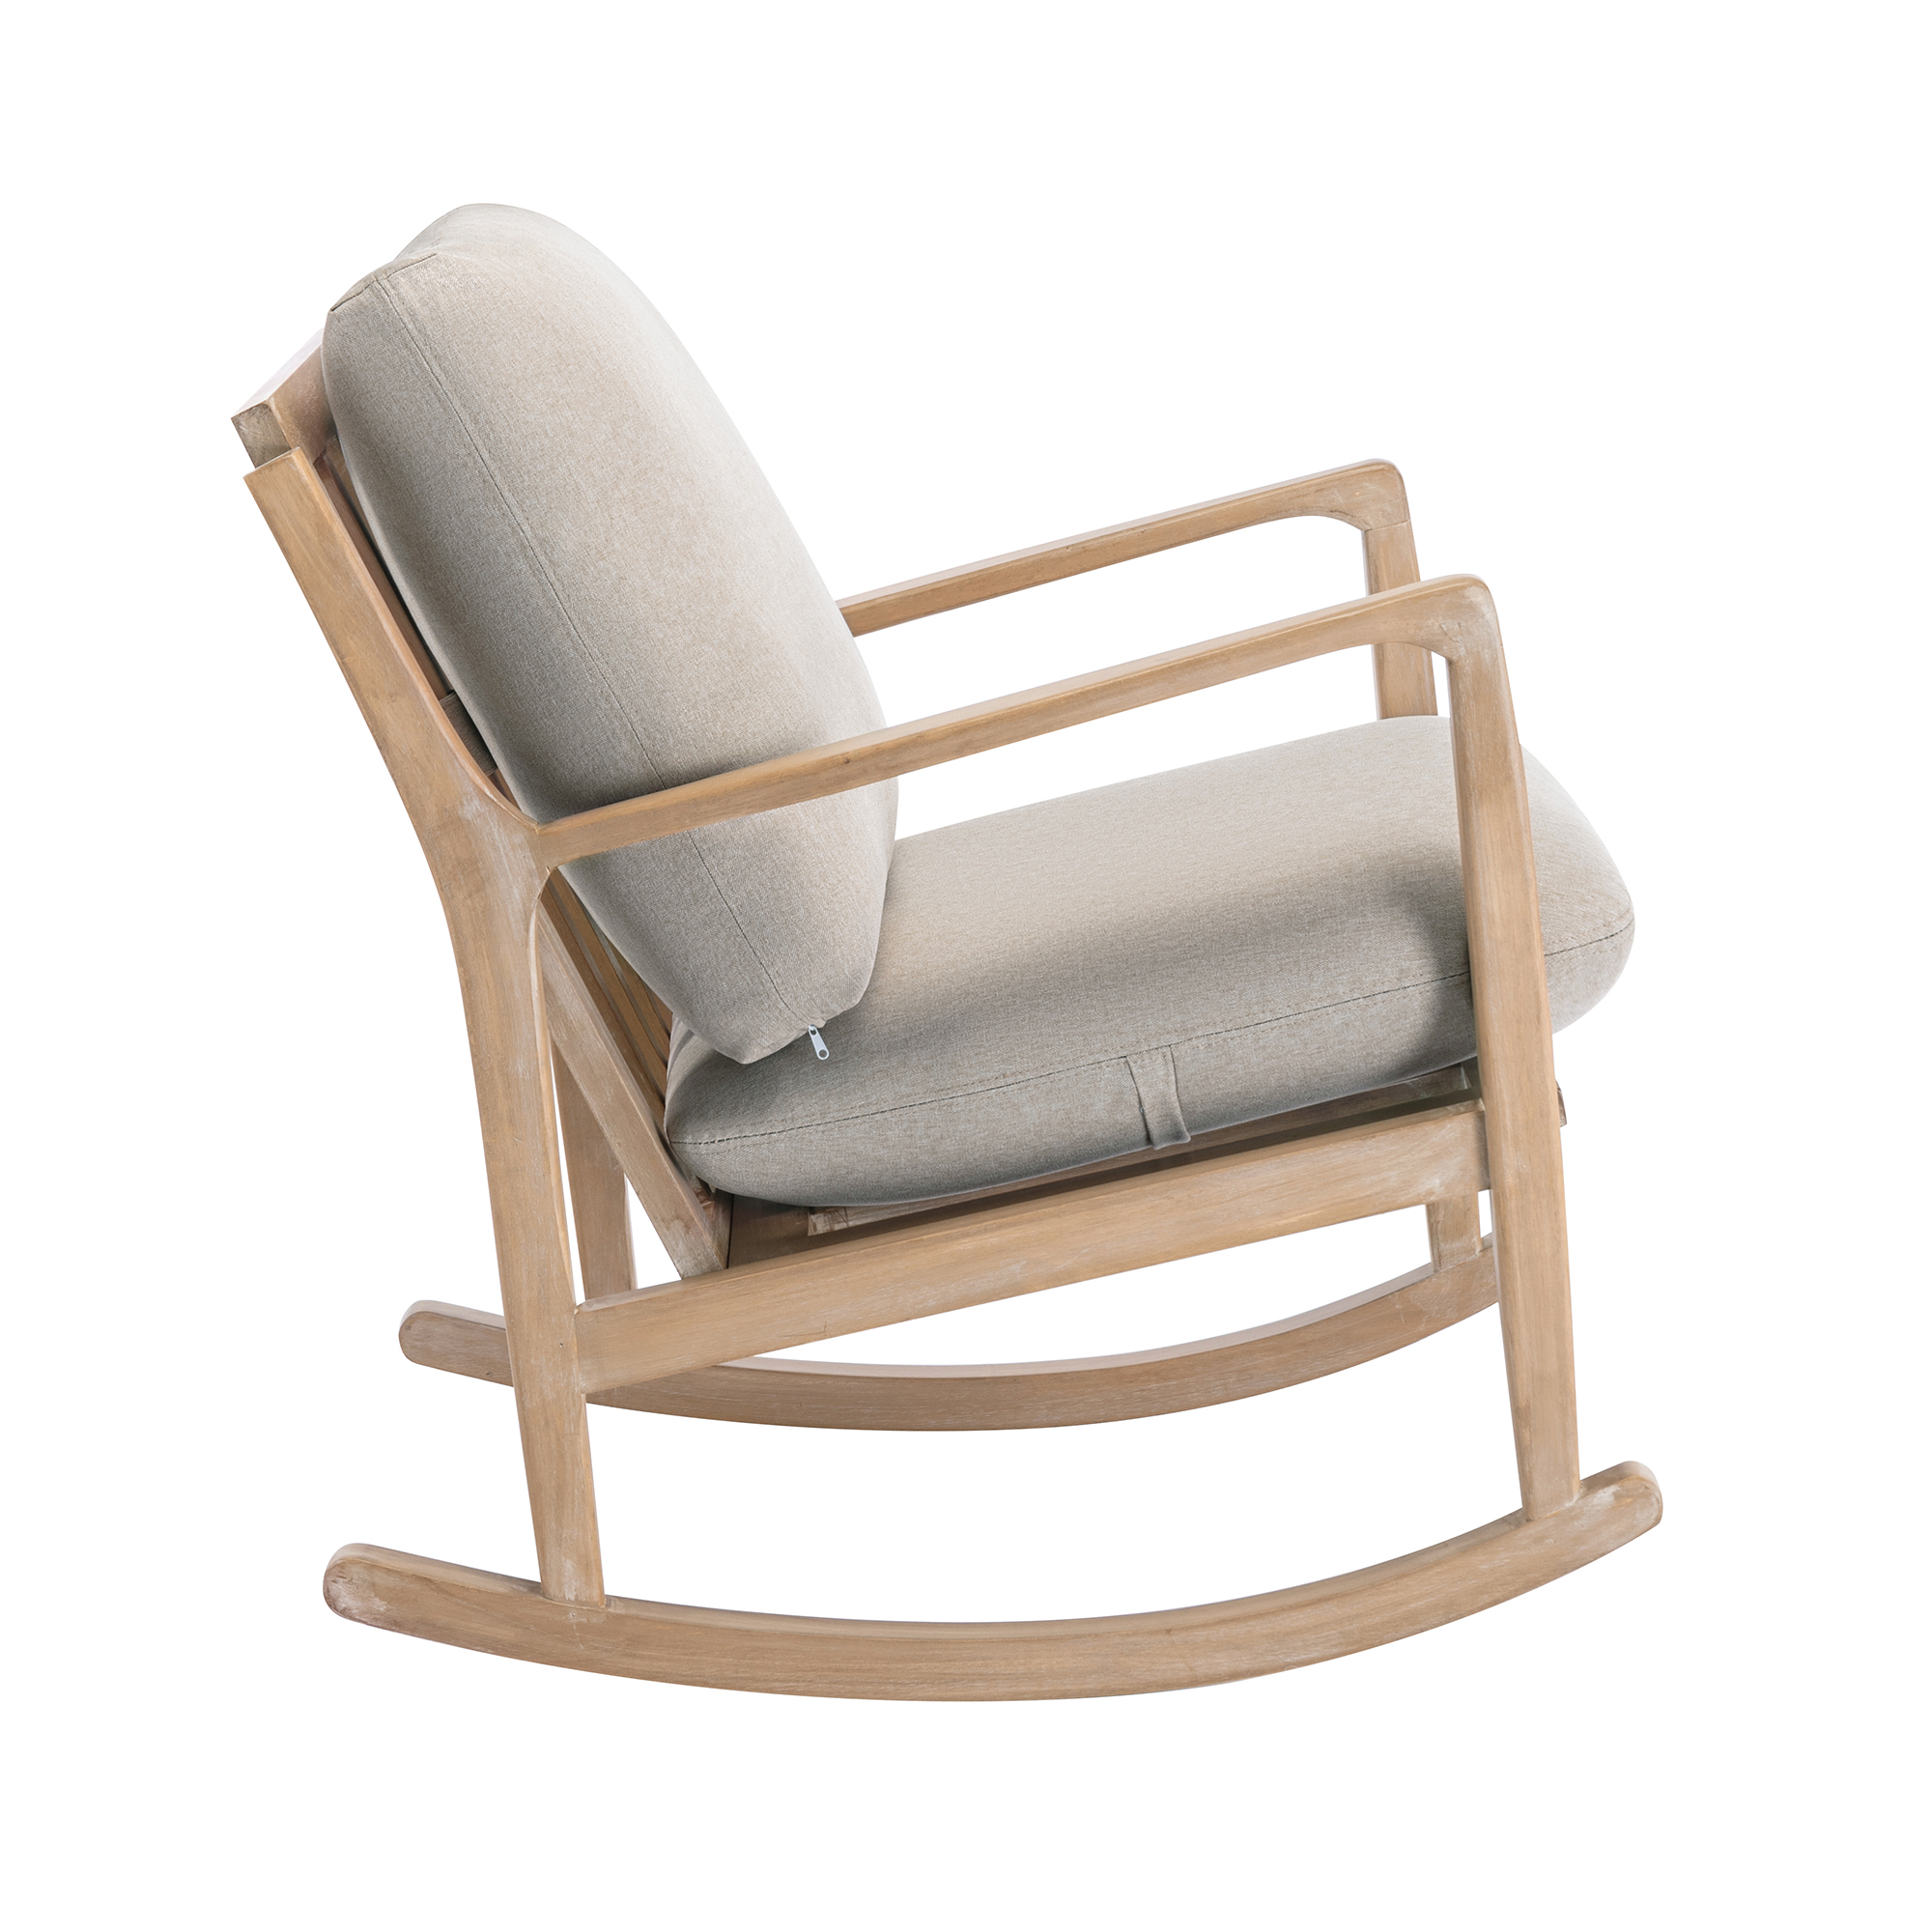 Solid Wood Rocking Chair, Linen Fabric Upholstered Comfy Accent Chair for Porch, Garden Patio, Balcony, Living Room and Bedroom, Beige - image 3 of 9